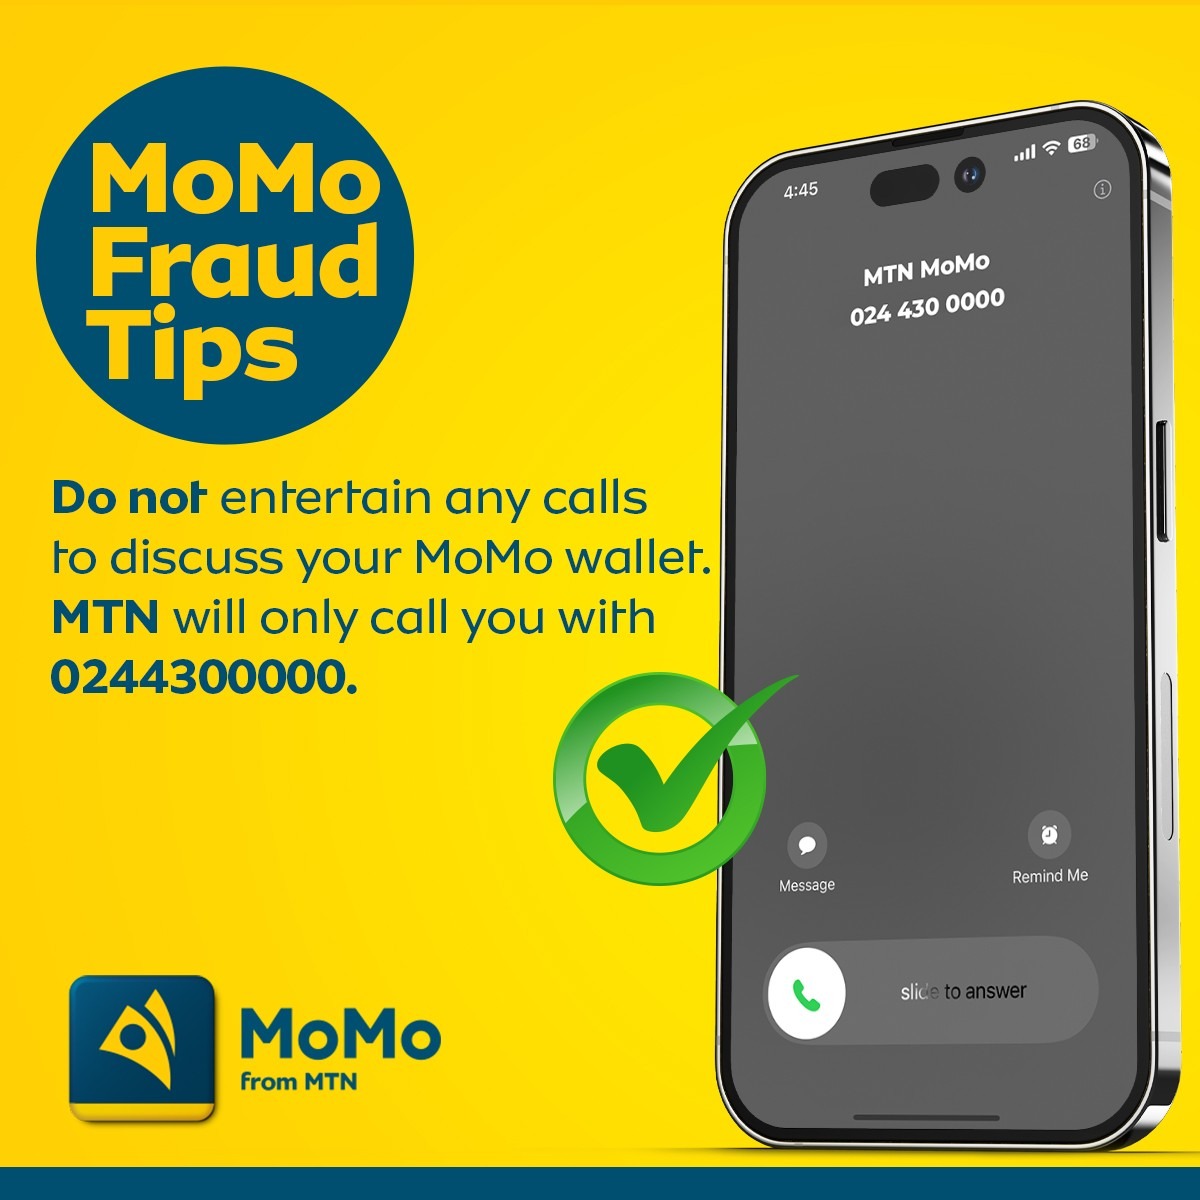 Do not entertain any calls to discuss your MoMo wallet. We will ONLY call you with 0244300000. #MoMoFraudTips